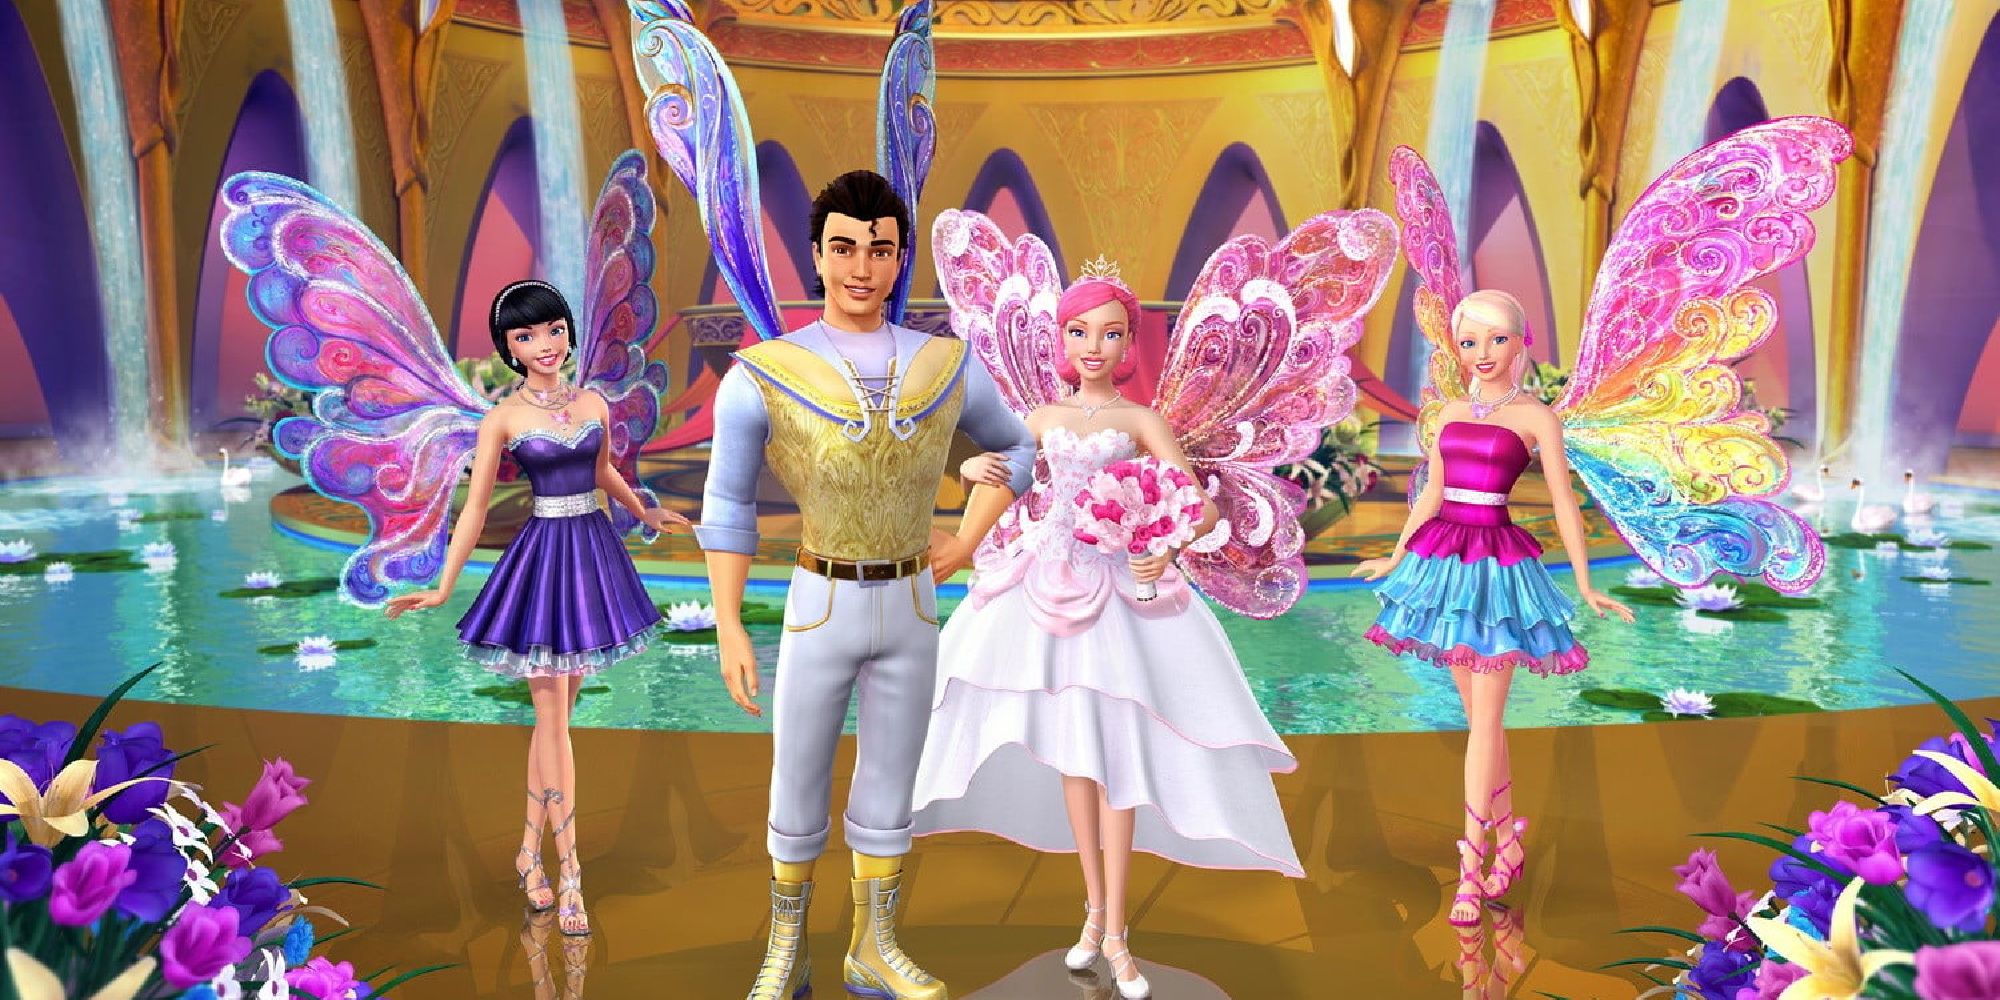 Barbie and the rest of the cast of A Fairy Secret